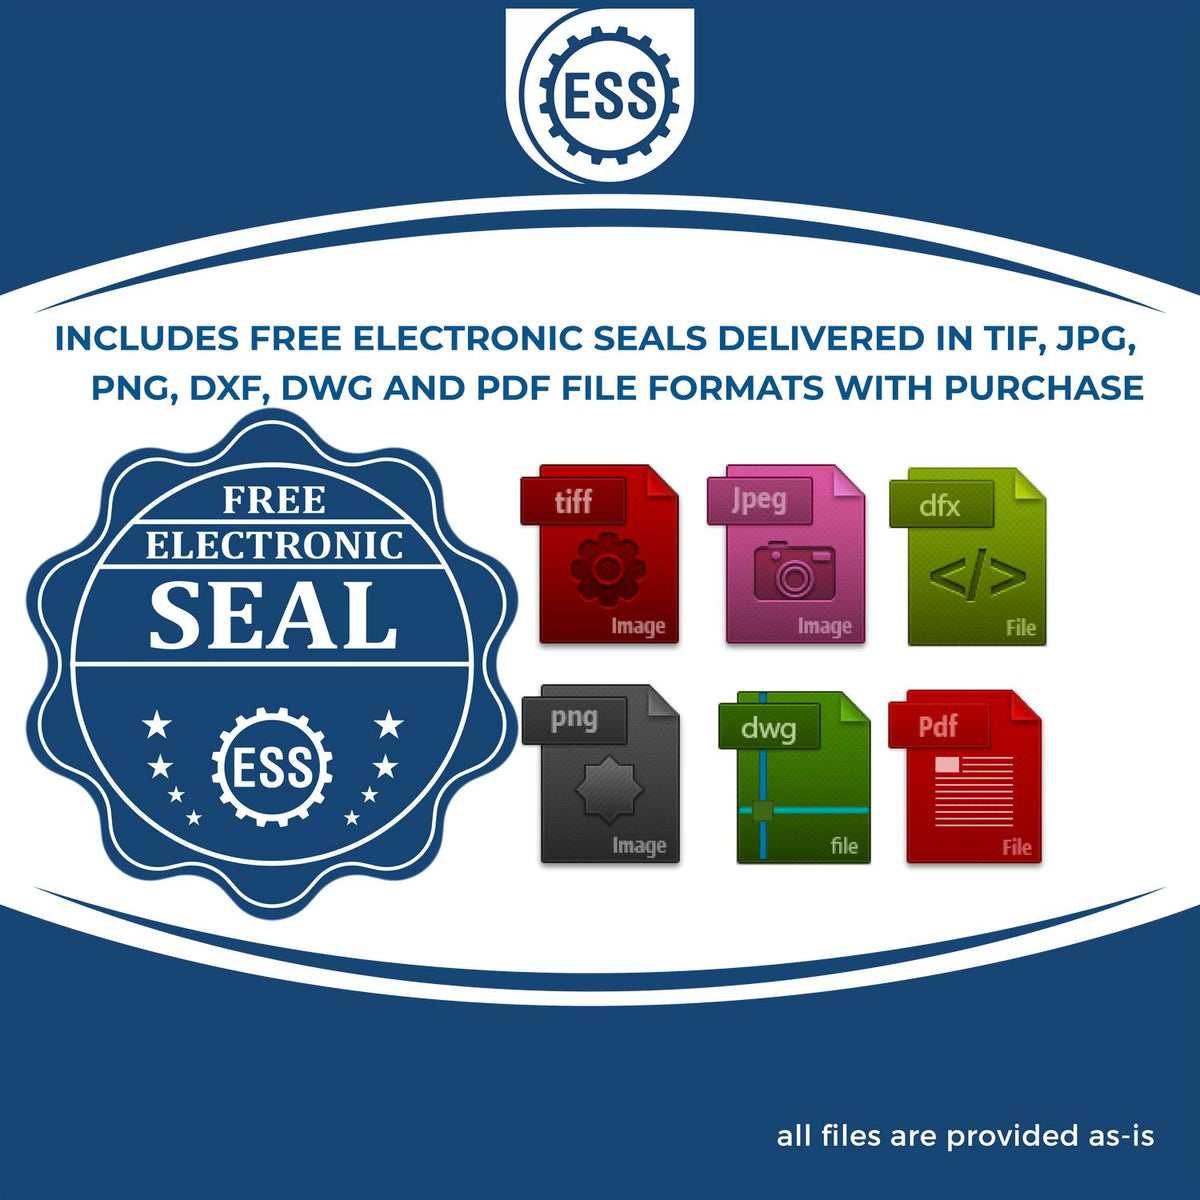 An infographic for the free electronic seal for the Heavy Duty Cast Iron West Virginia Geologist Seal Embosser illustrating the different file type icons such as DXF, DWG, TIF, JPG and PNG.